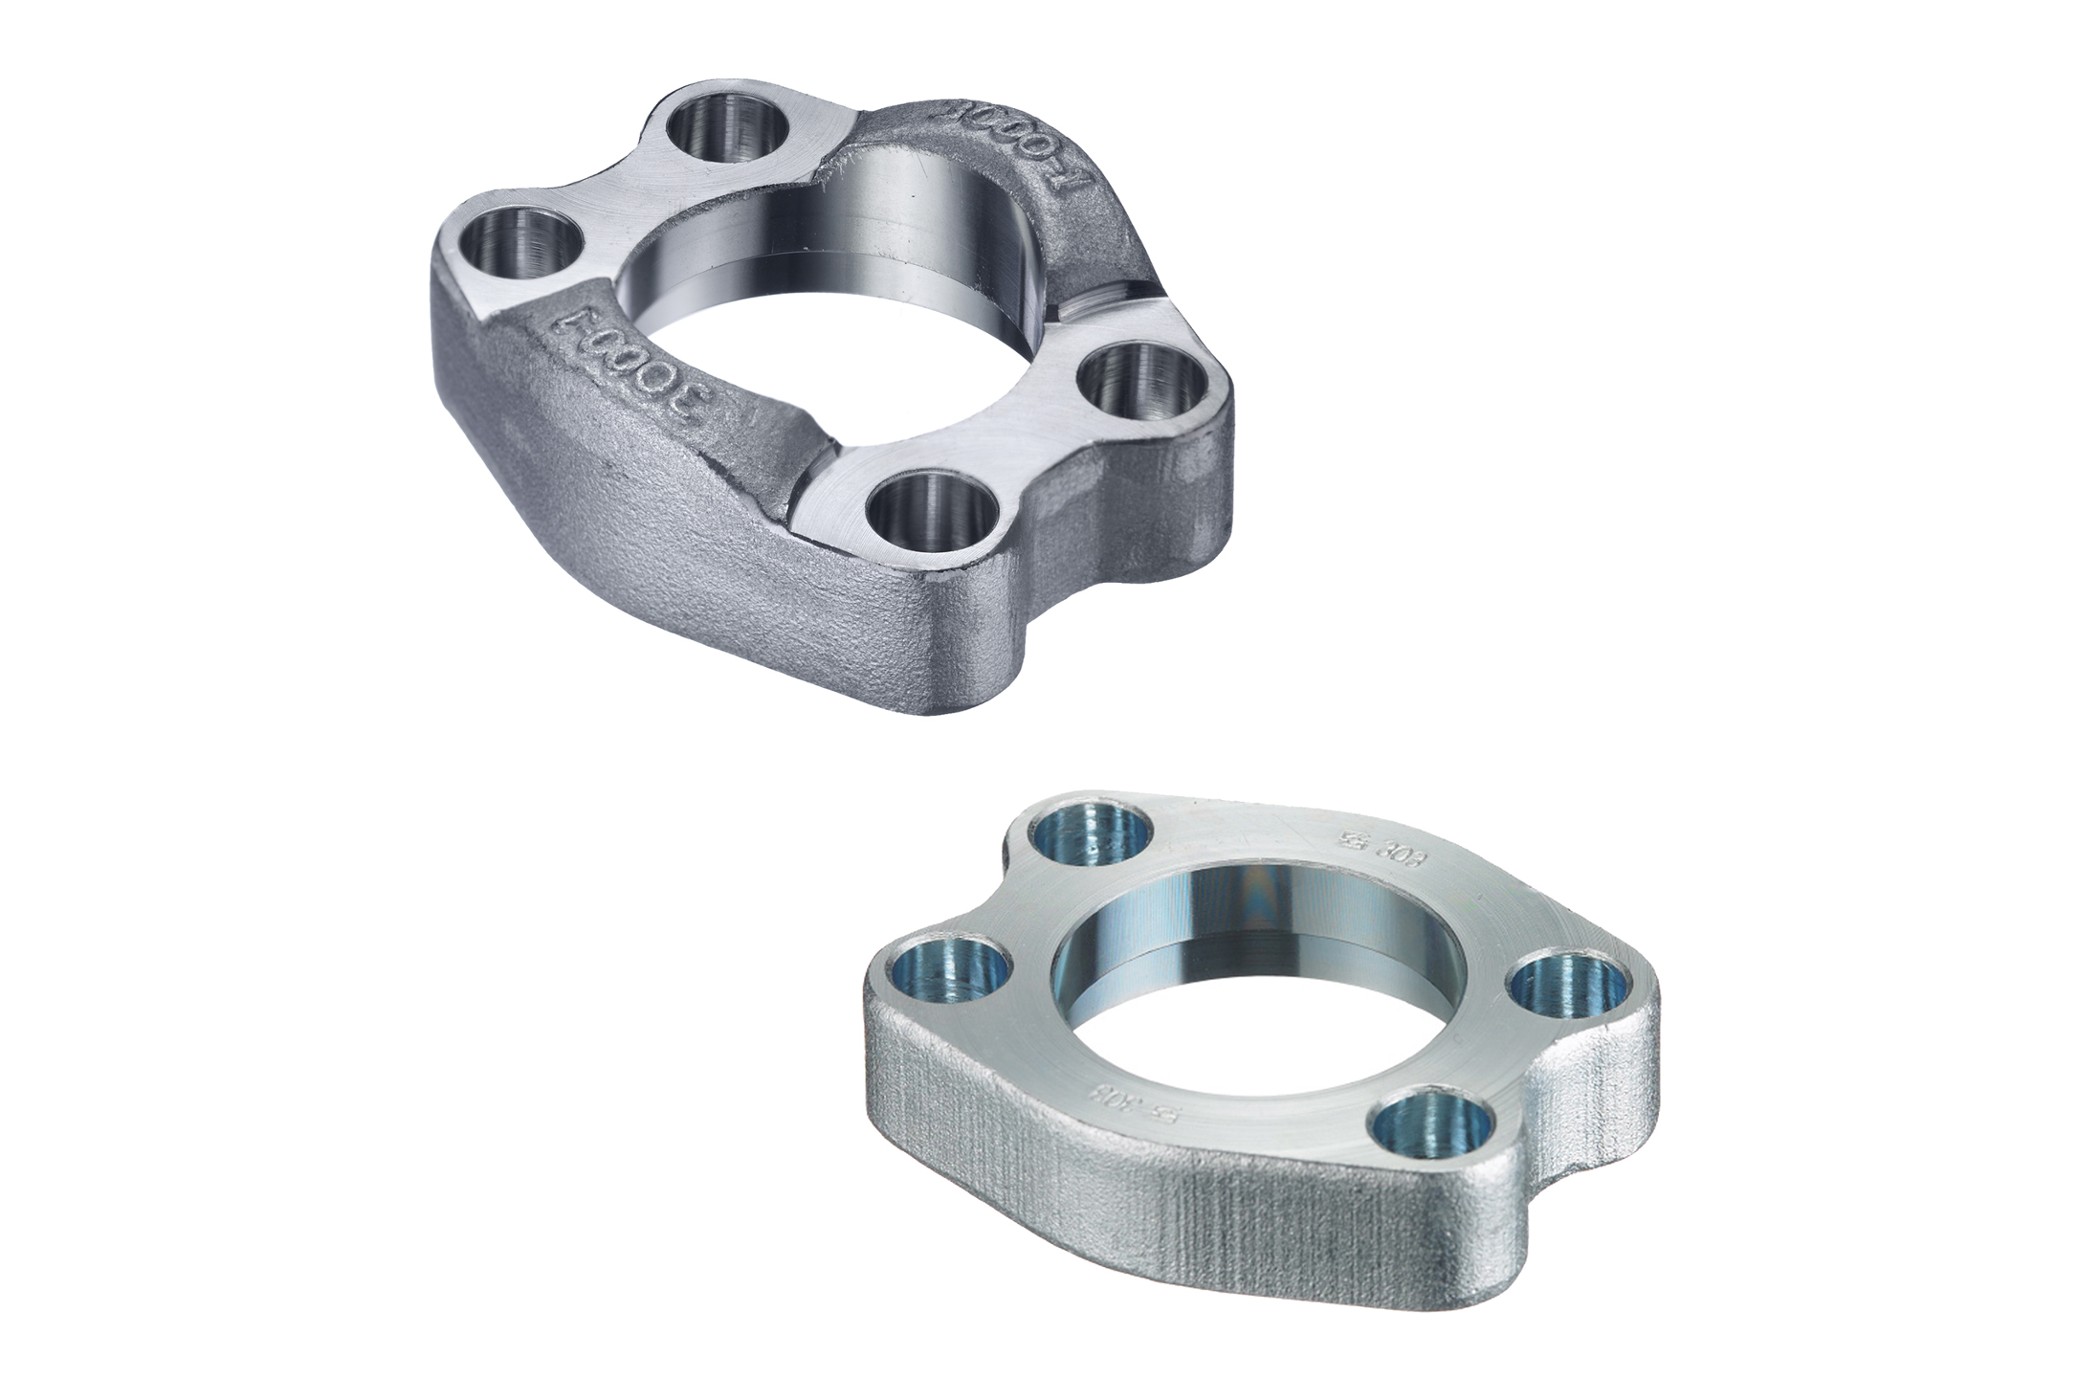 SAE Flange Clamps from STAUFF